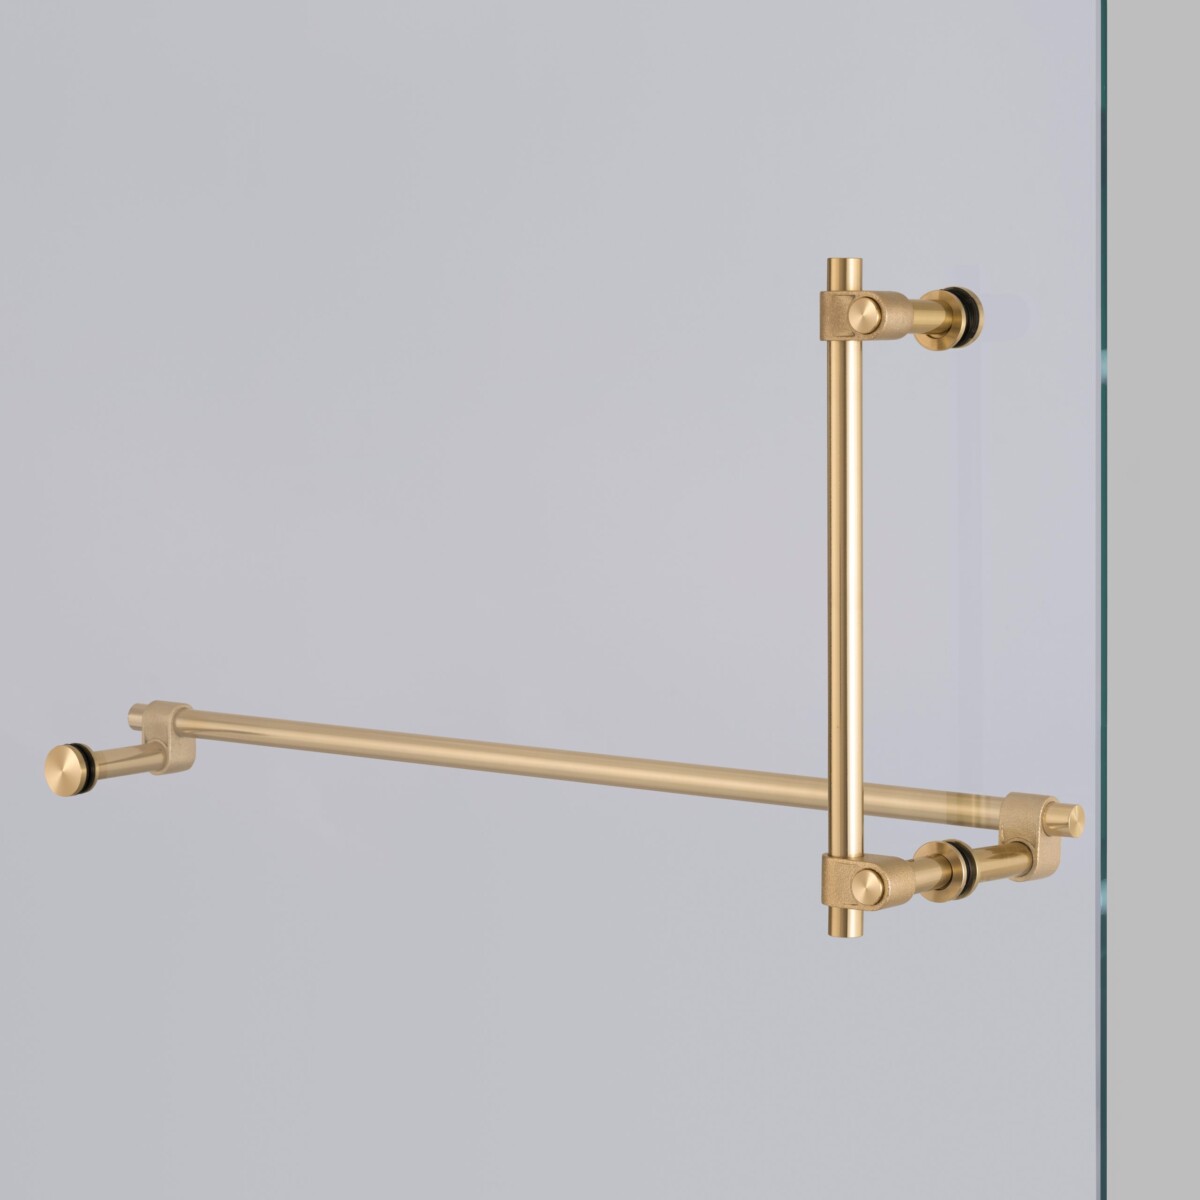 BP_Cast_Towel_Rail_and_Pull_Bar_Brass_A1_Web-scaled